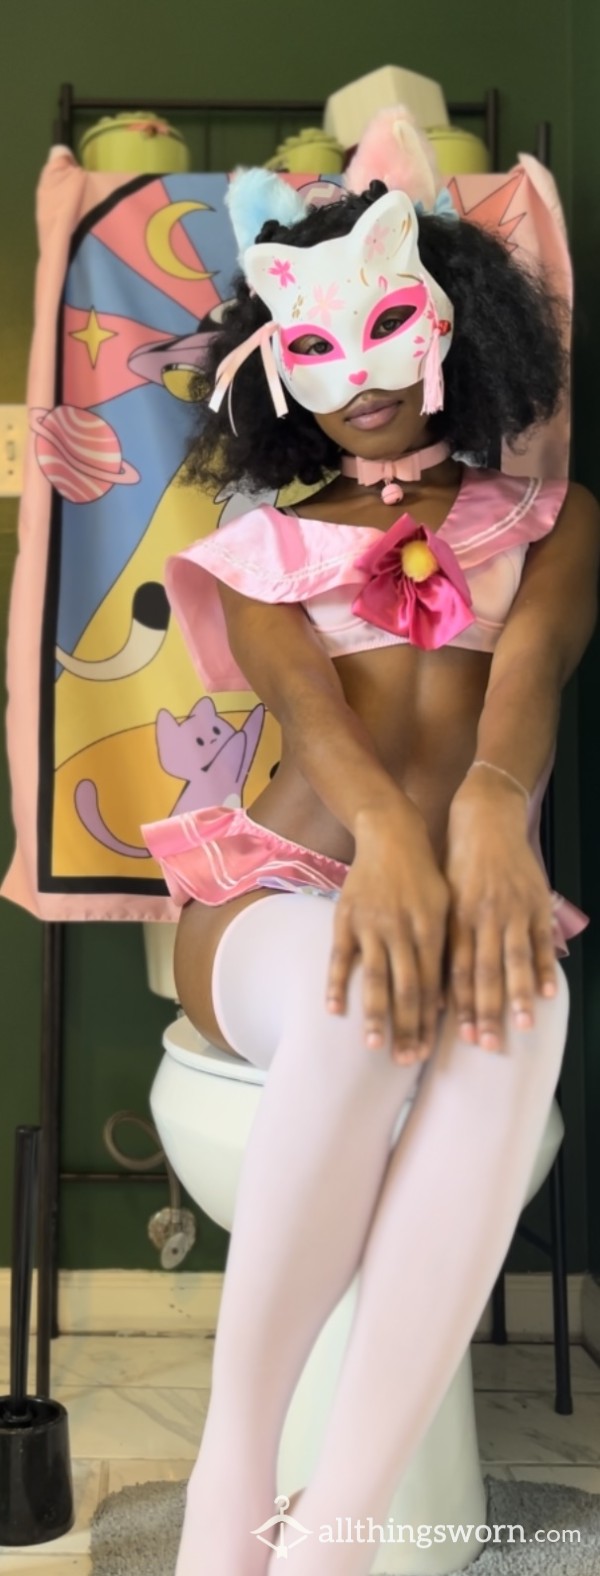 ✨🐾Watch Sailor Kitty Pull Down Her See Through Panties & Pee In The Potty🐈‍⬛🎀✨